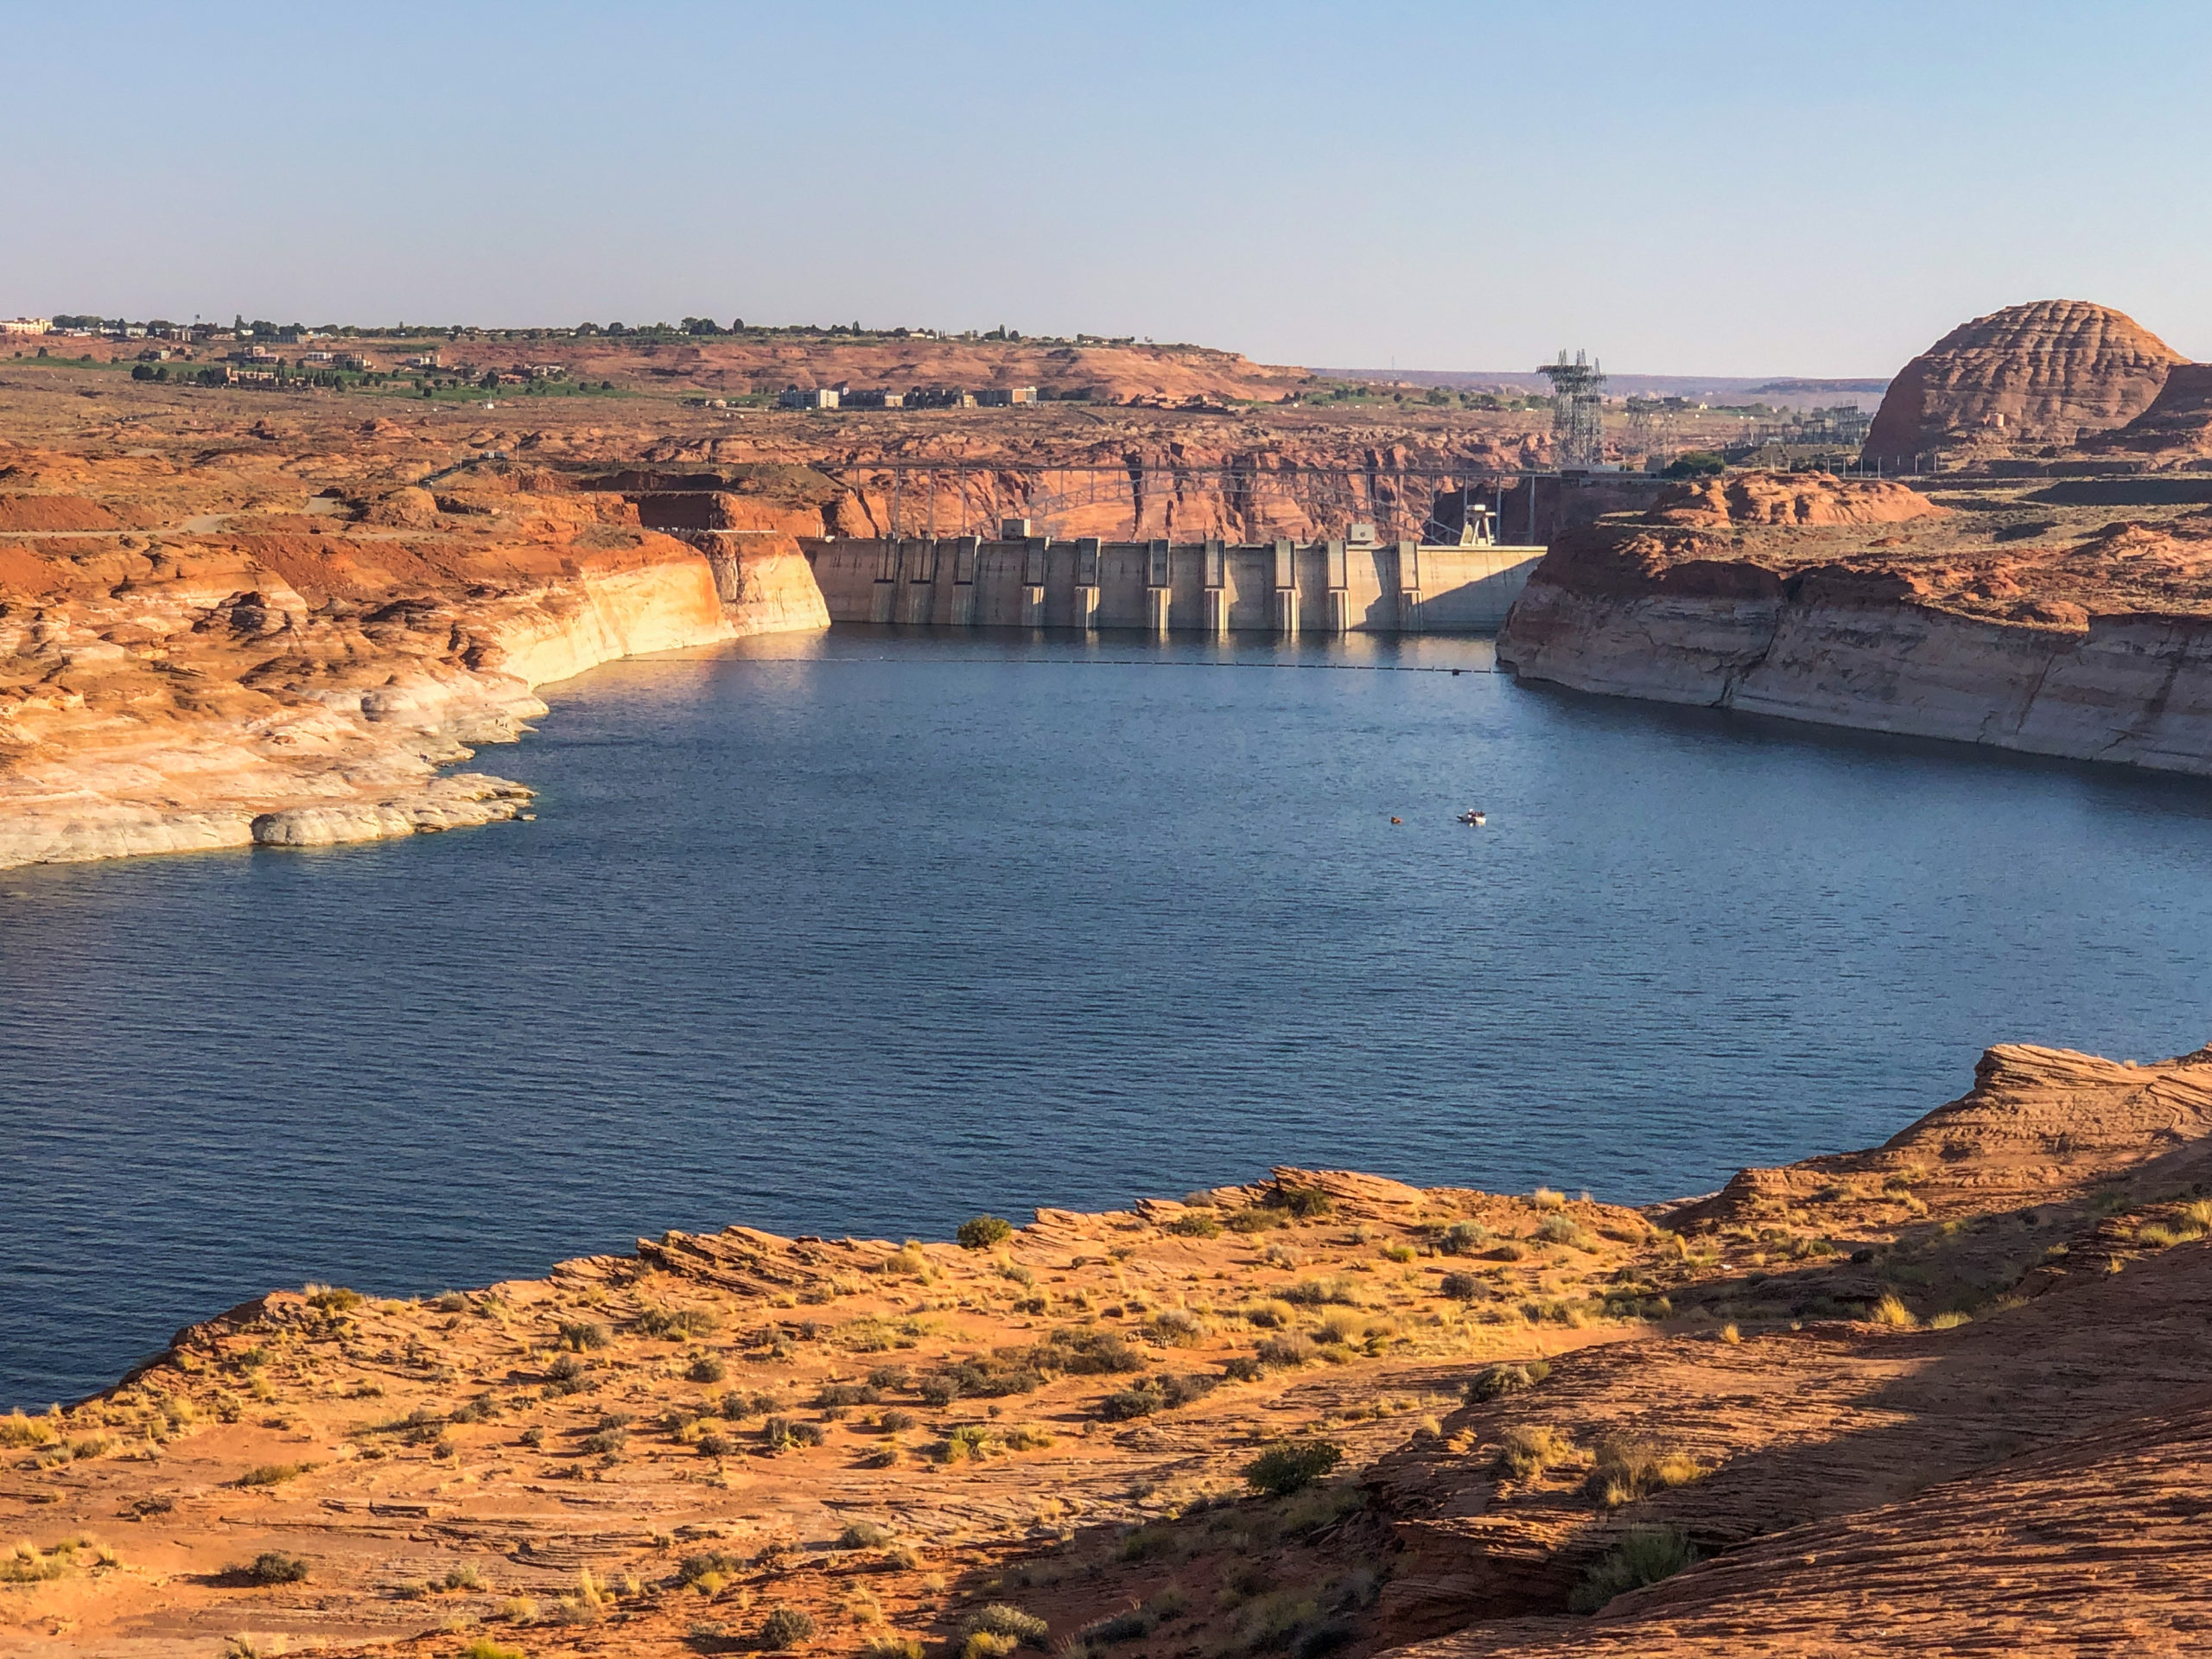 Glen Canyon Dam with the town of Page, Arizona, in the upper left. Lake Powell was at 46% of capacity on Sept. 30 after dropping 19 feet during the previous 12 months. The last time the lake was full was in 1987, but the reservoir levels remained at near full capacity through the late 1990s. Photo credit: Denver Water.